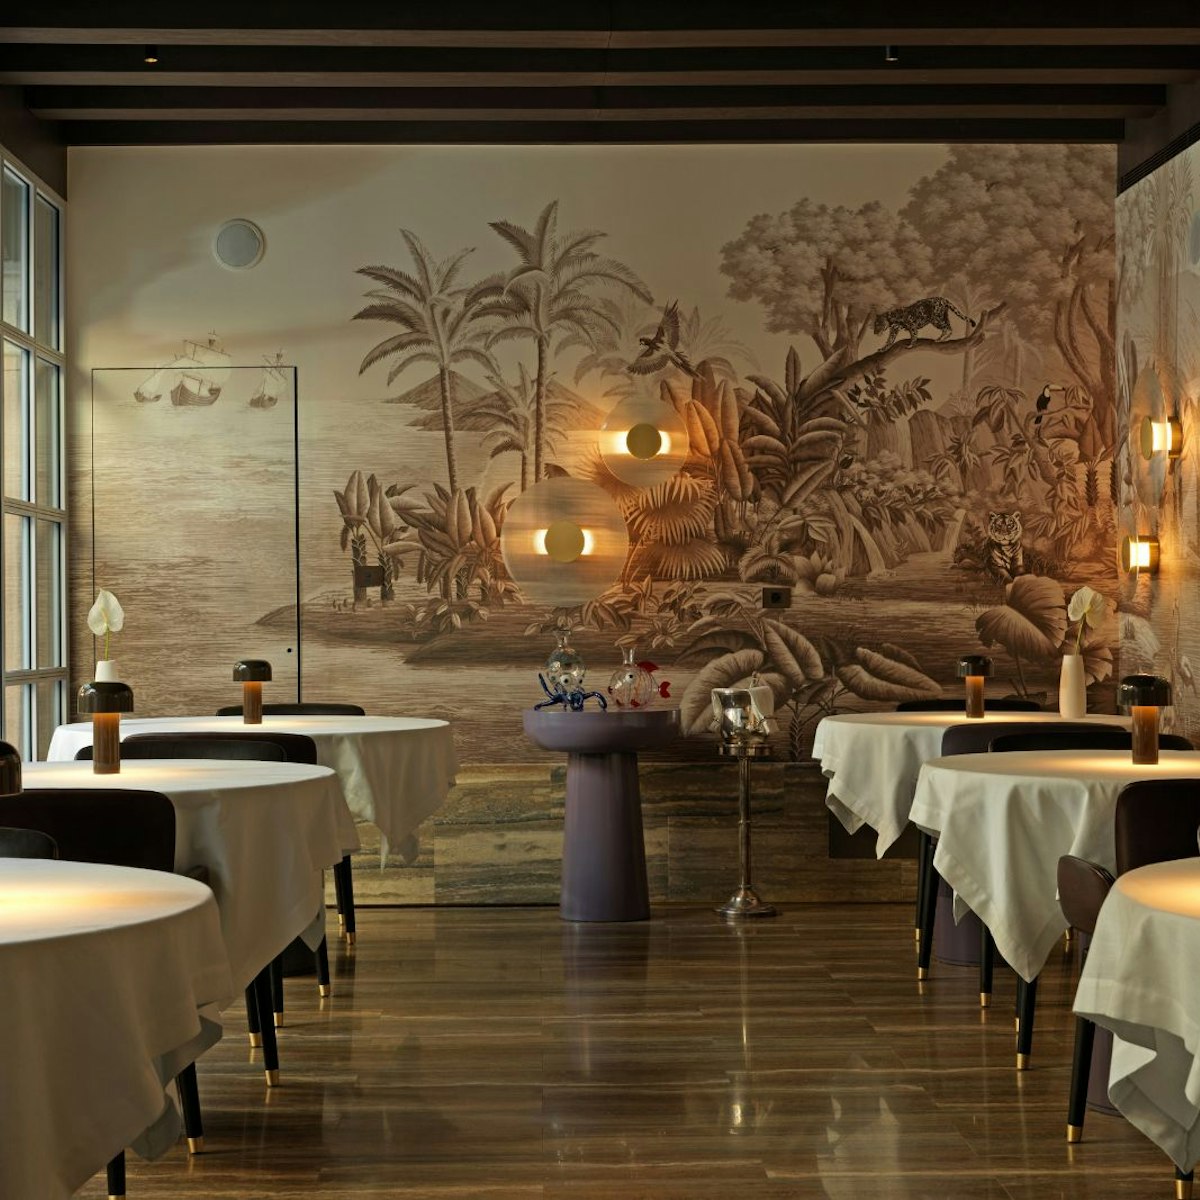 Ristorante Glam Venice. Intimate, acclaimed venue at a luxe hotel with a leafy courtyard presenting imaginative dishes.